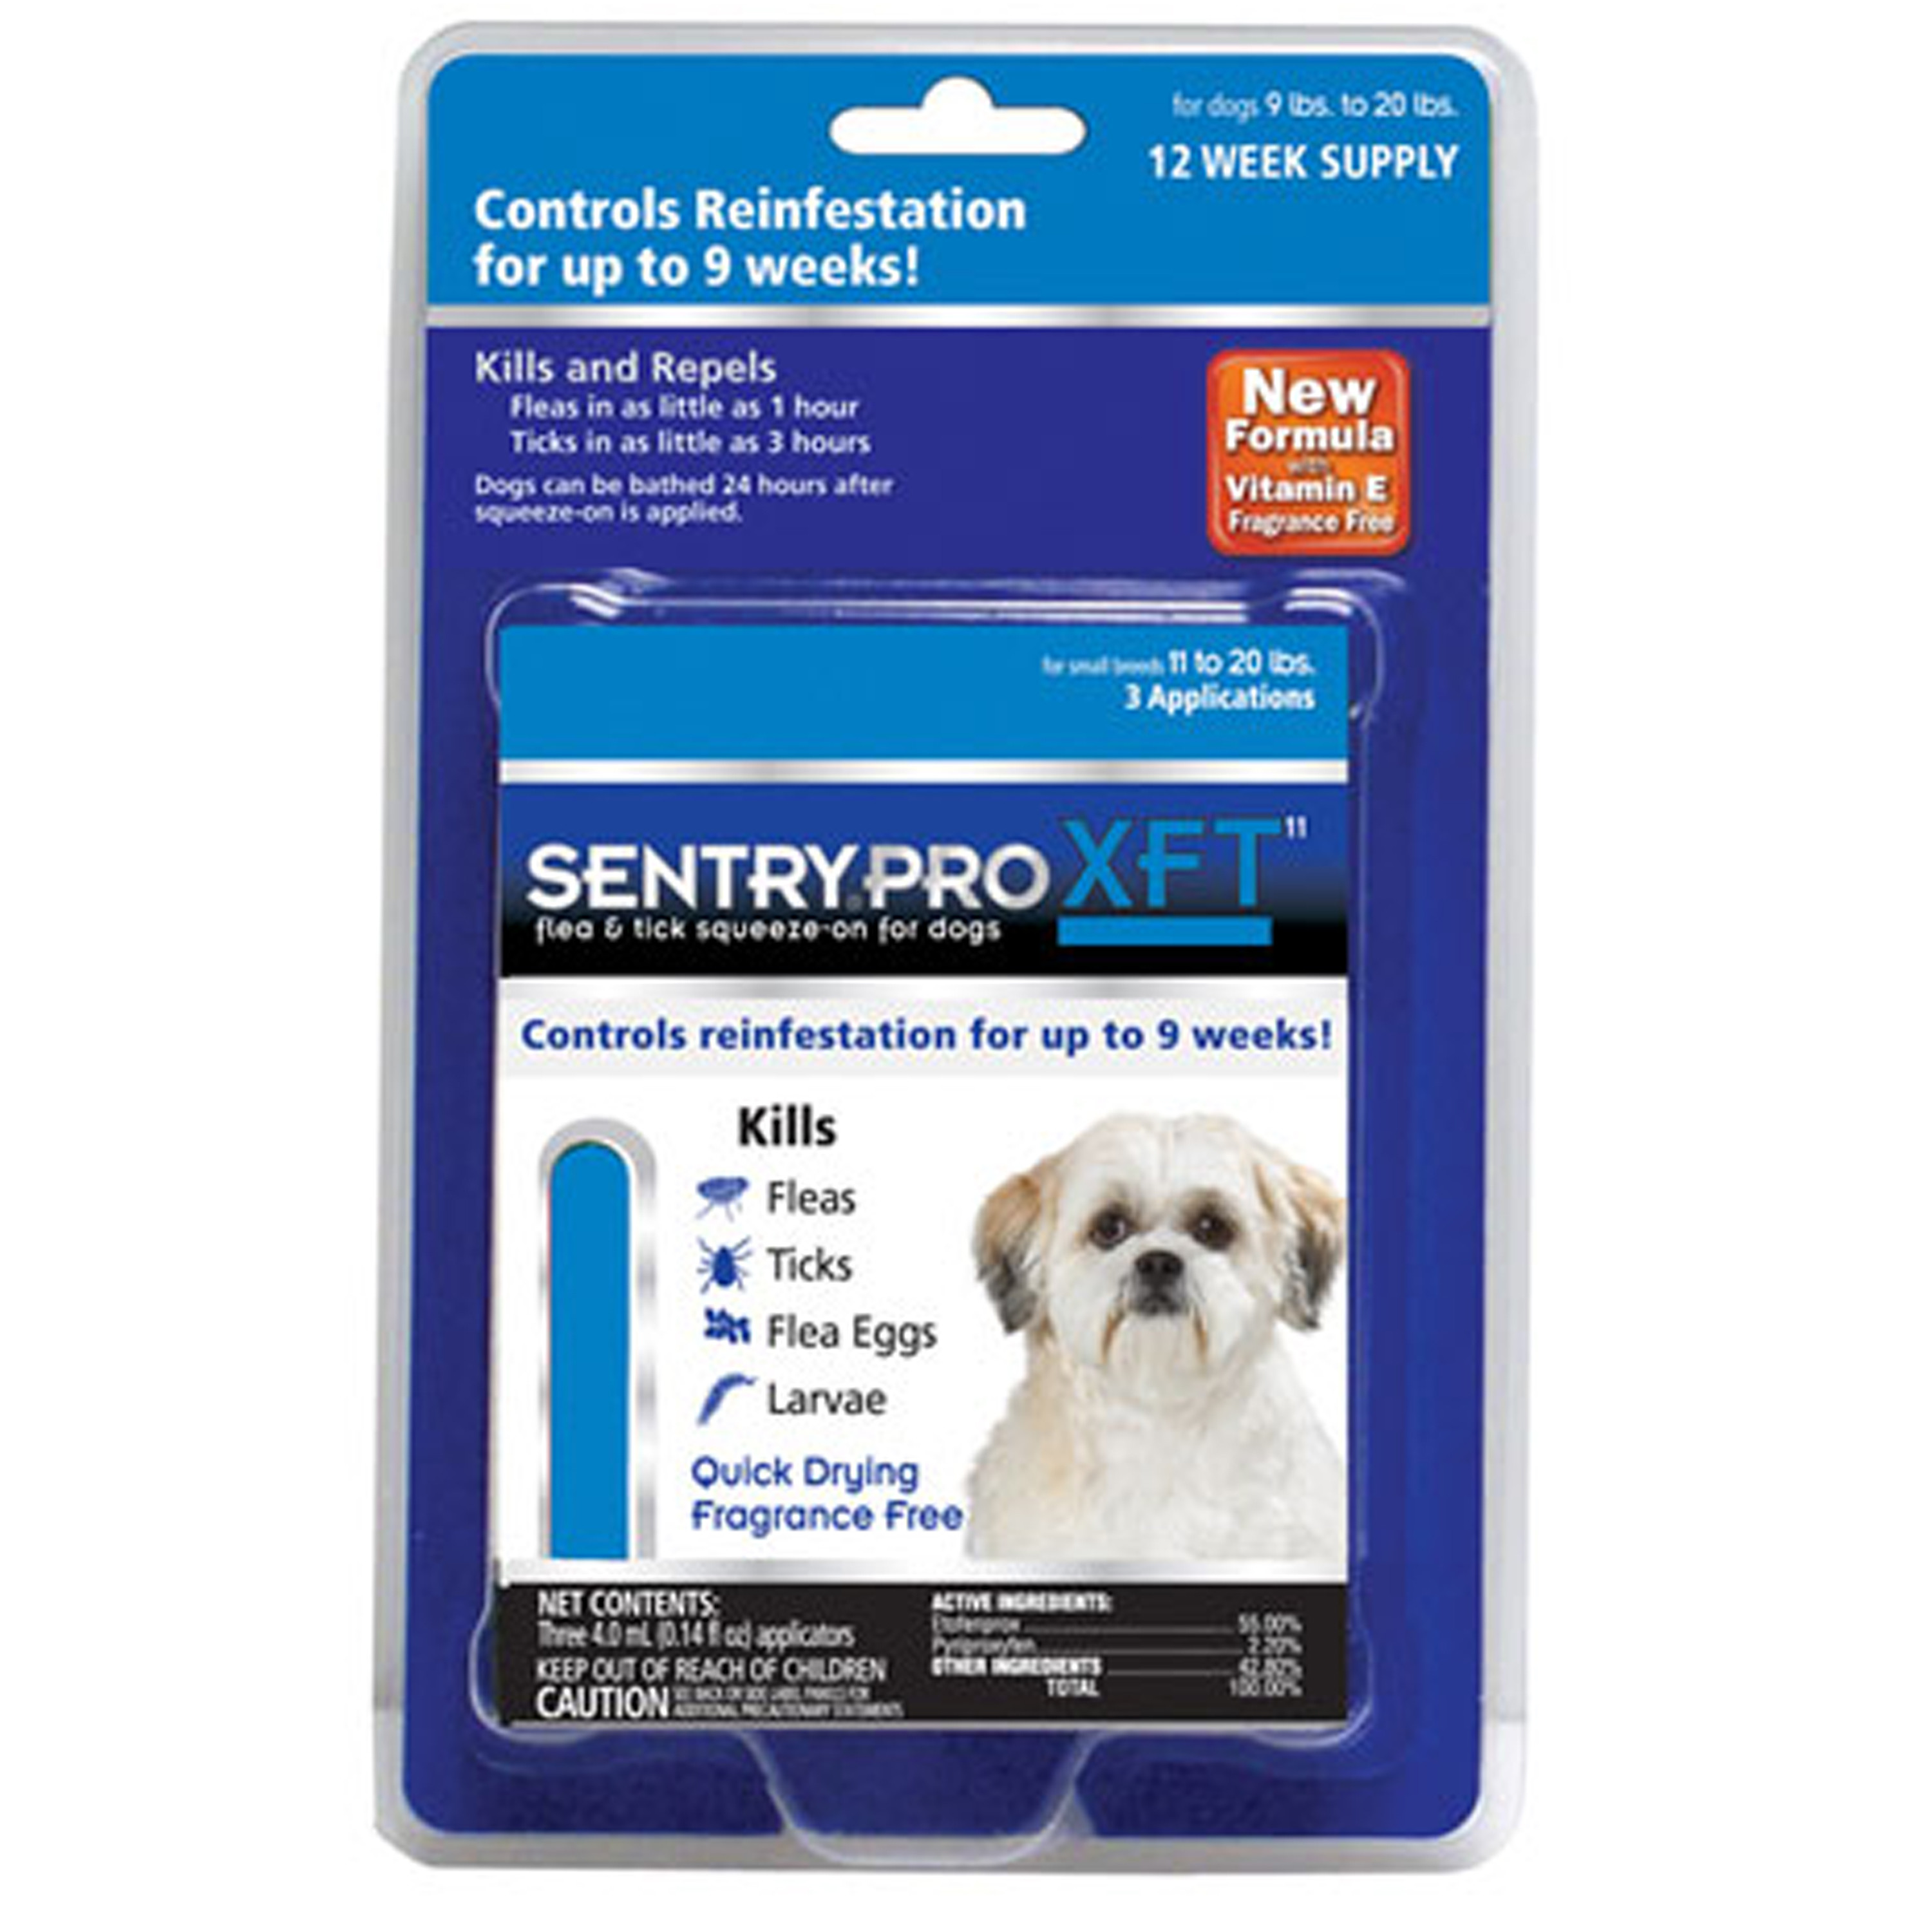 SENTRY PET CARE Fiproguard Plus for Dogs  Flea and Tick Prevention for Dogs (5-22 Pounds)  Includes Month Supply of Topical Flea Treatments (3429)